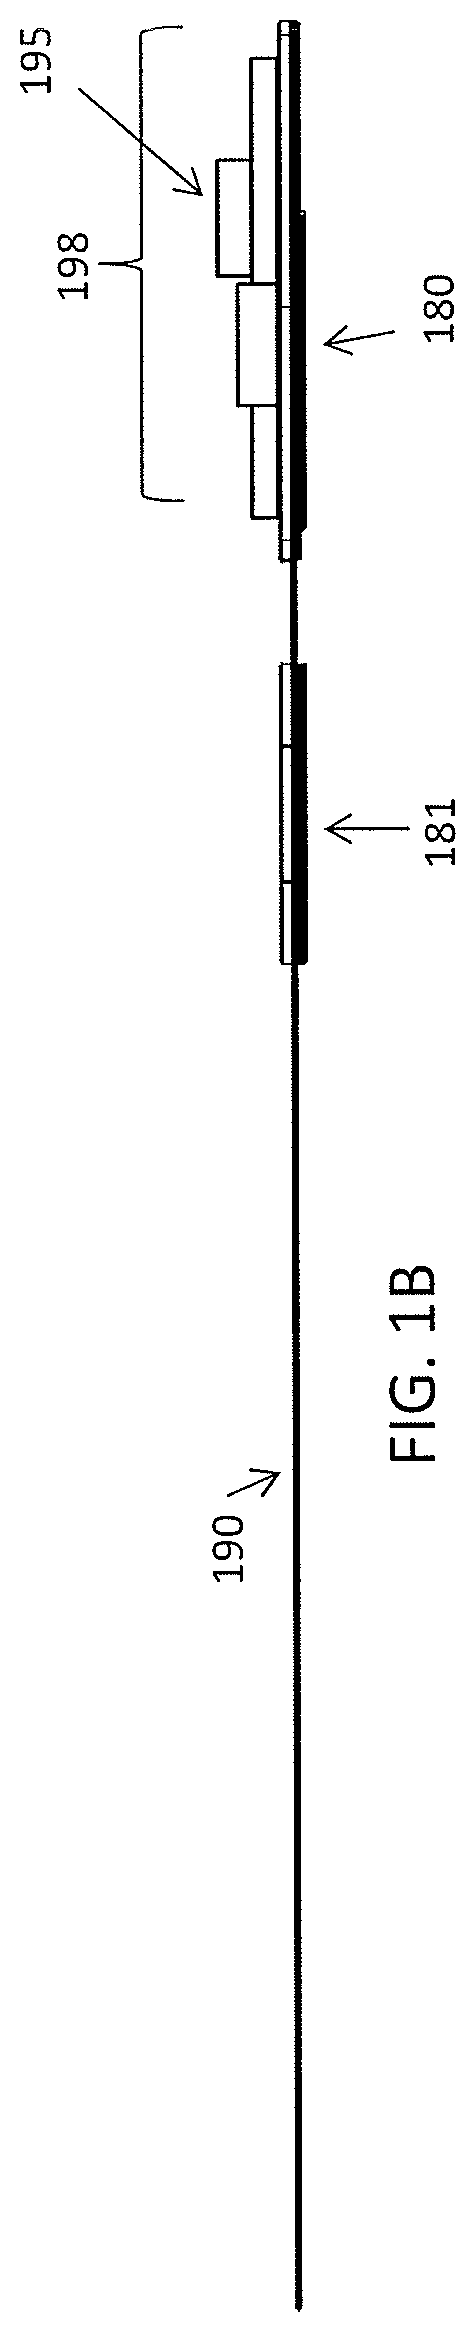 Methods and apparatuses for transdermal electrical stimulation